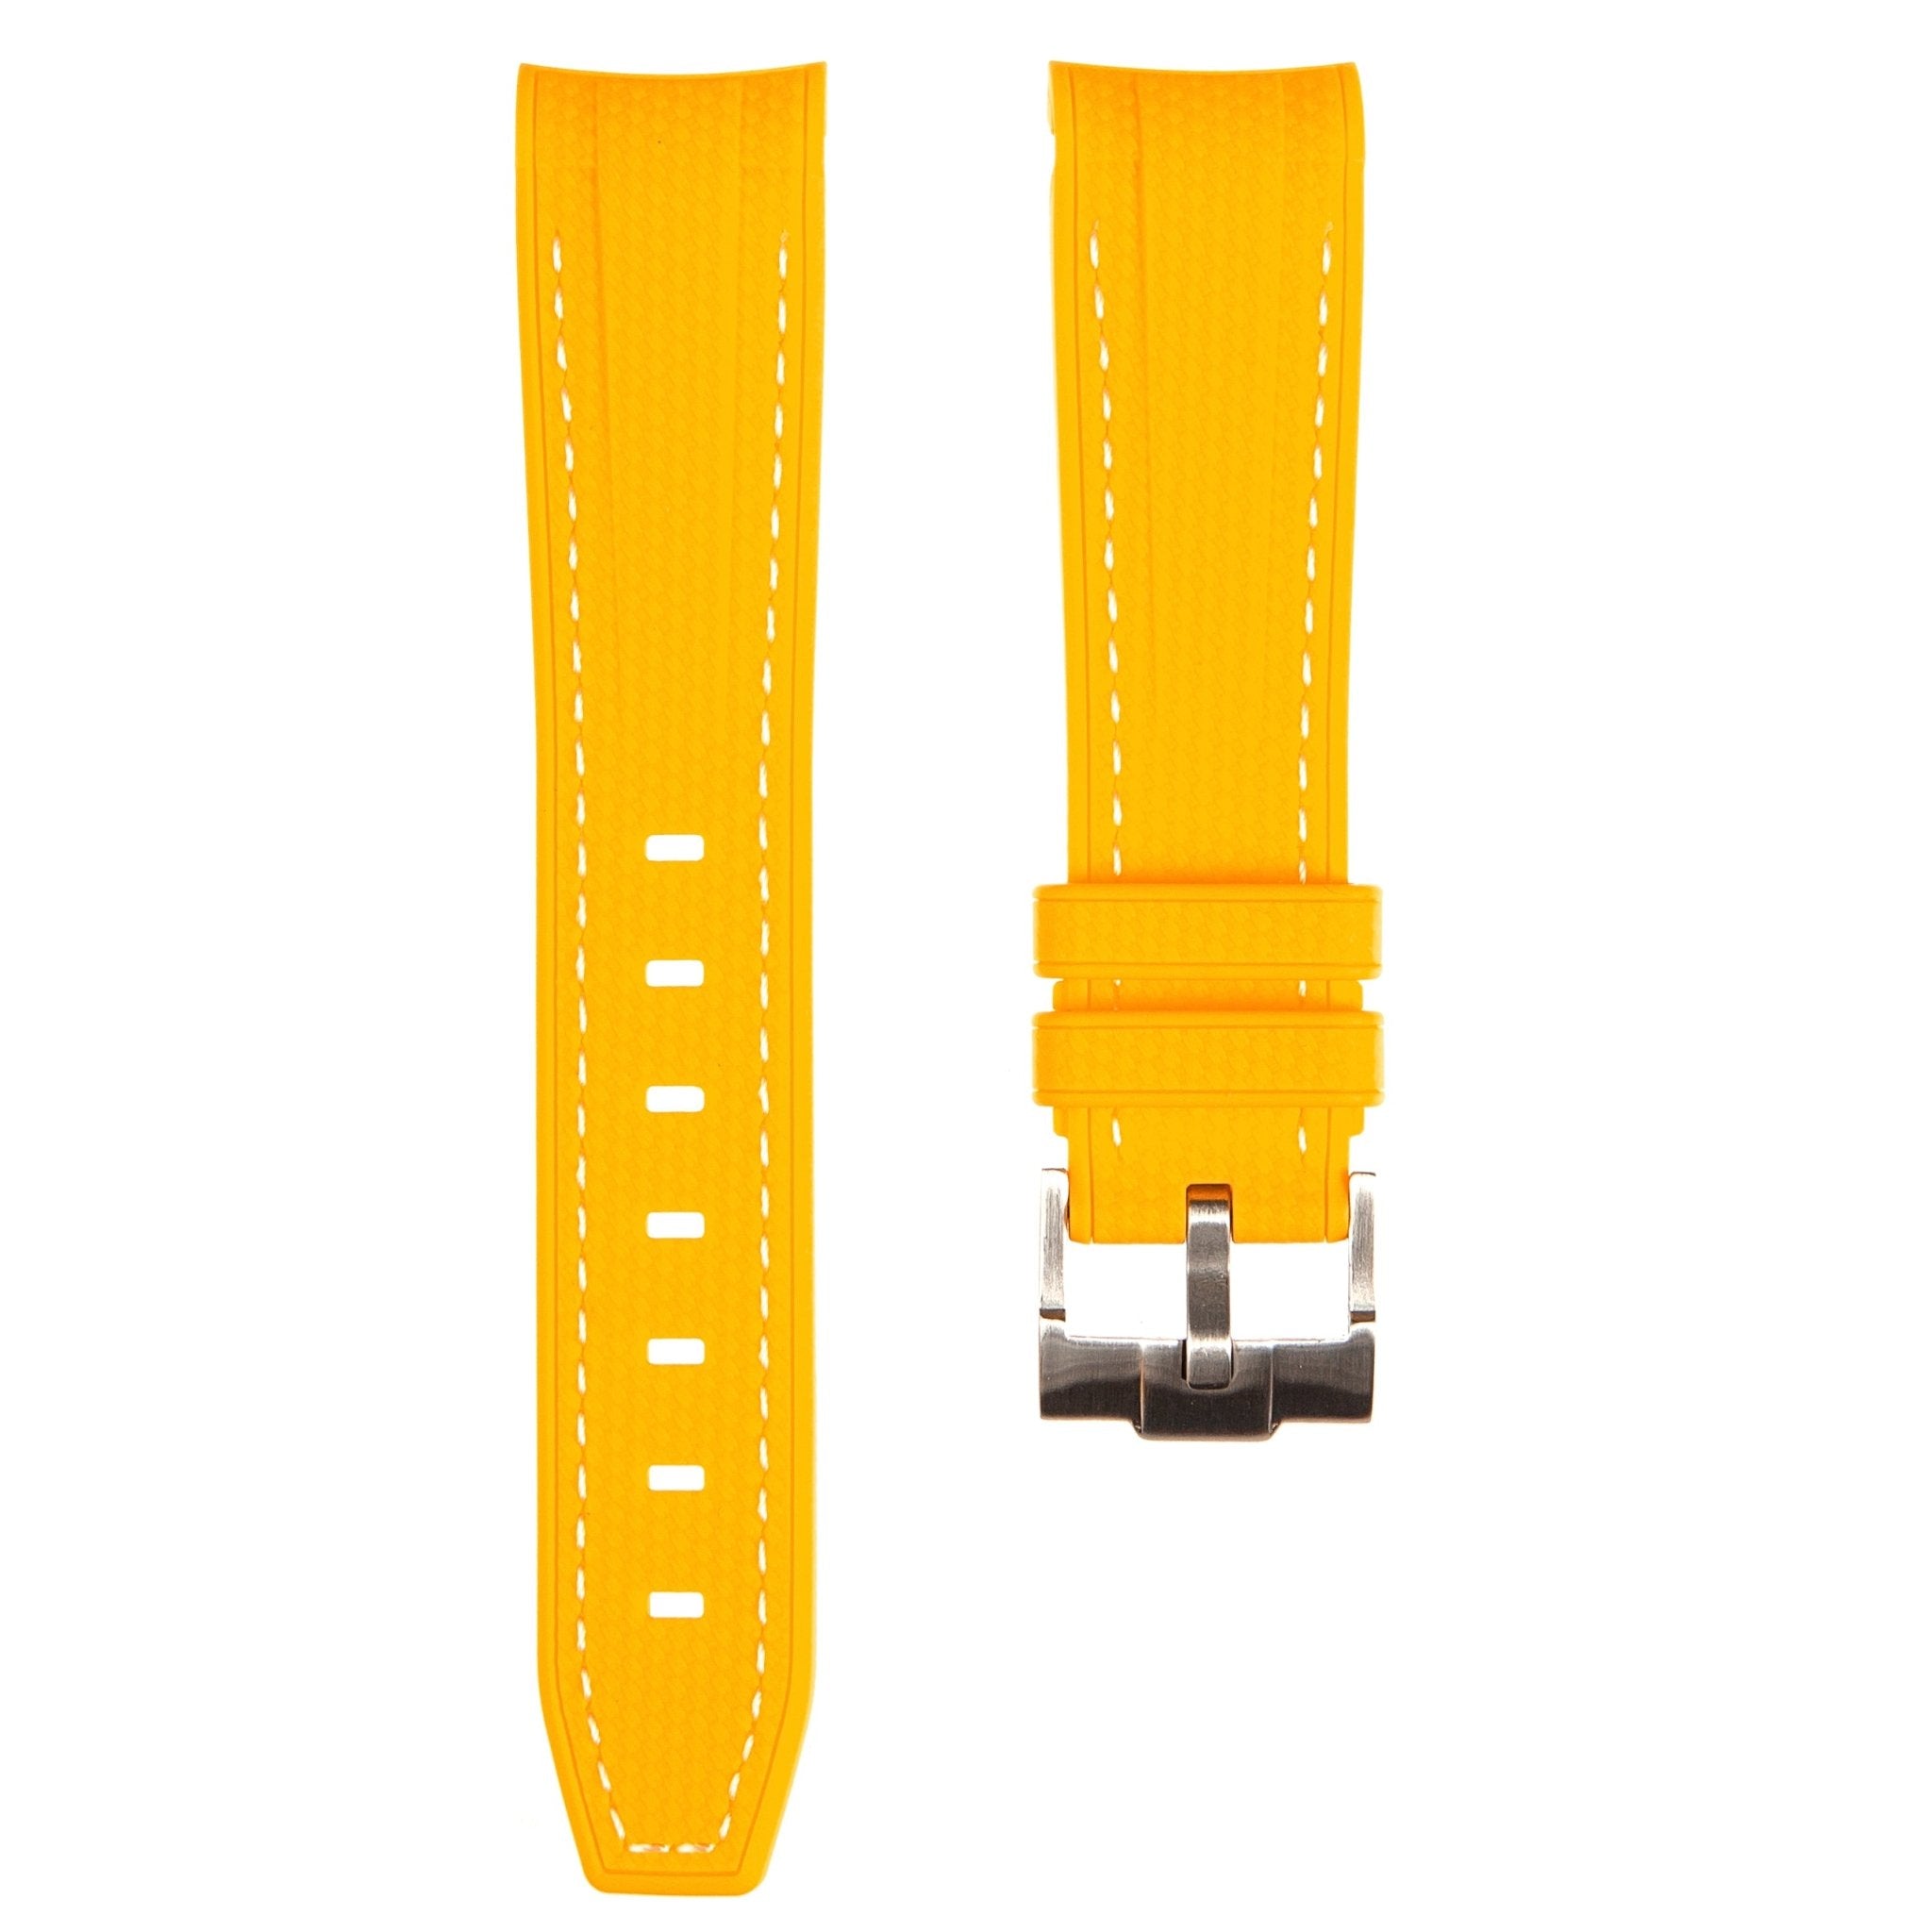 Textured Curved End Premium Silicone Strap - Compatible with Omega Moonwatch - Yellow with White Stitch (2405) -StrapSeeker